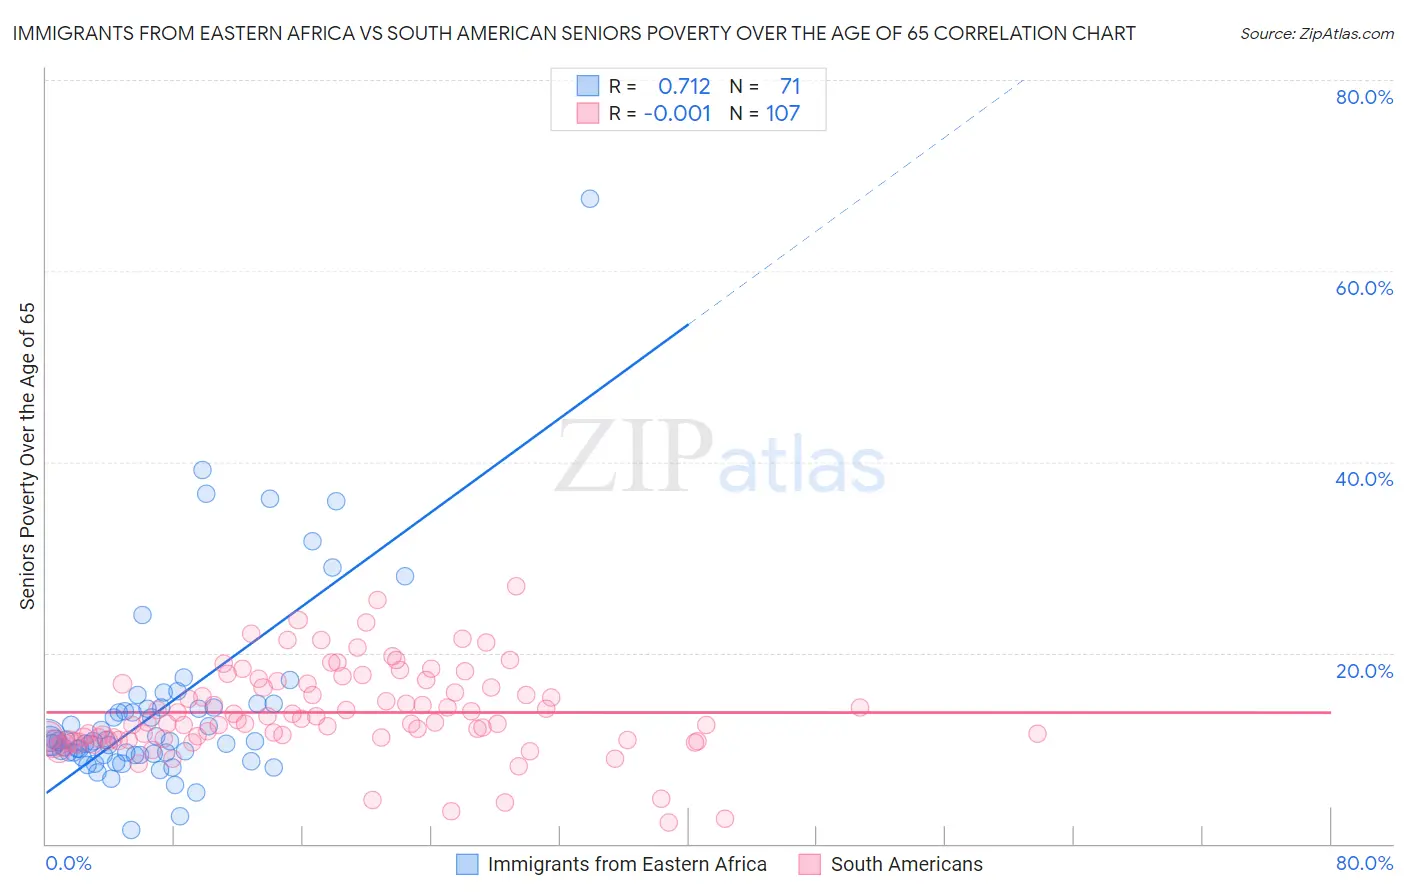 Immigrants from Eastern Africa vs South American Seniors Poverty Over the Age of 65